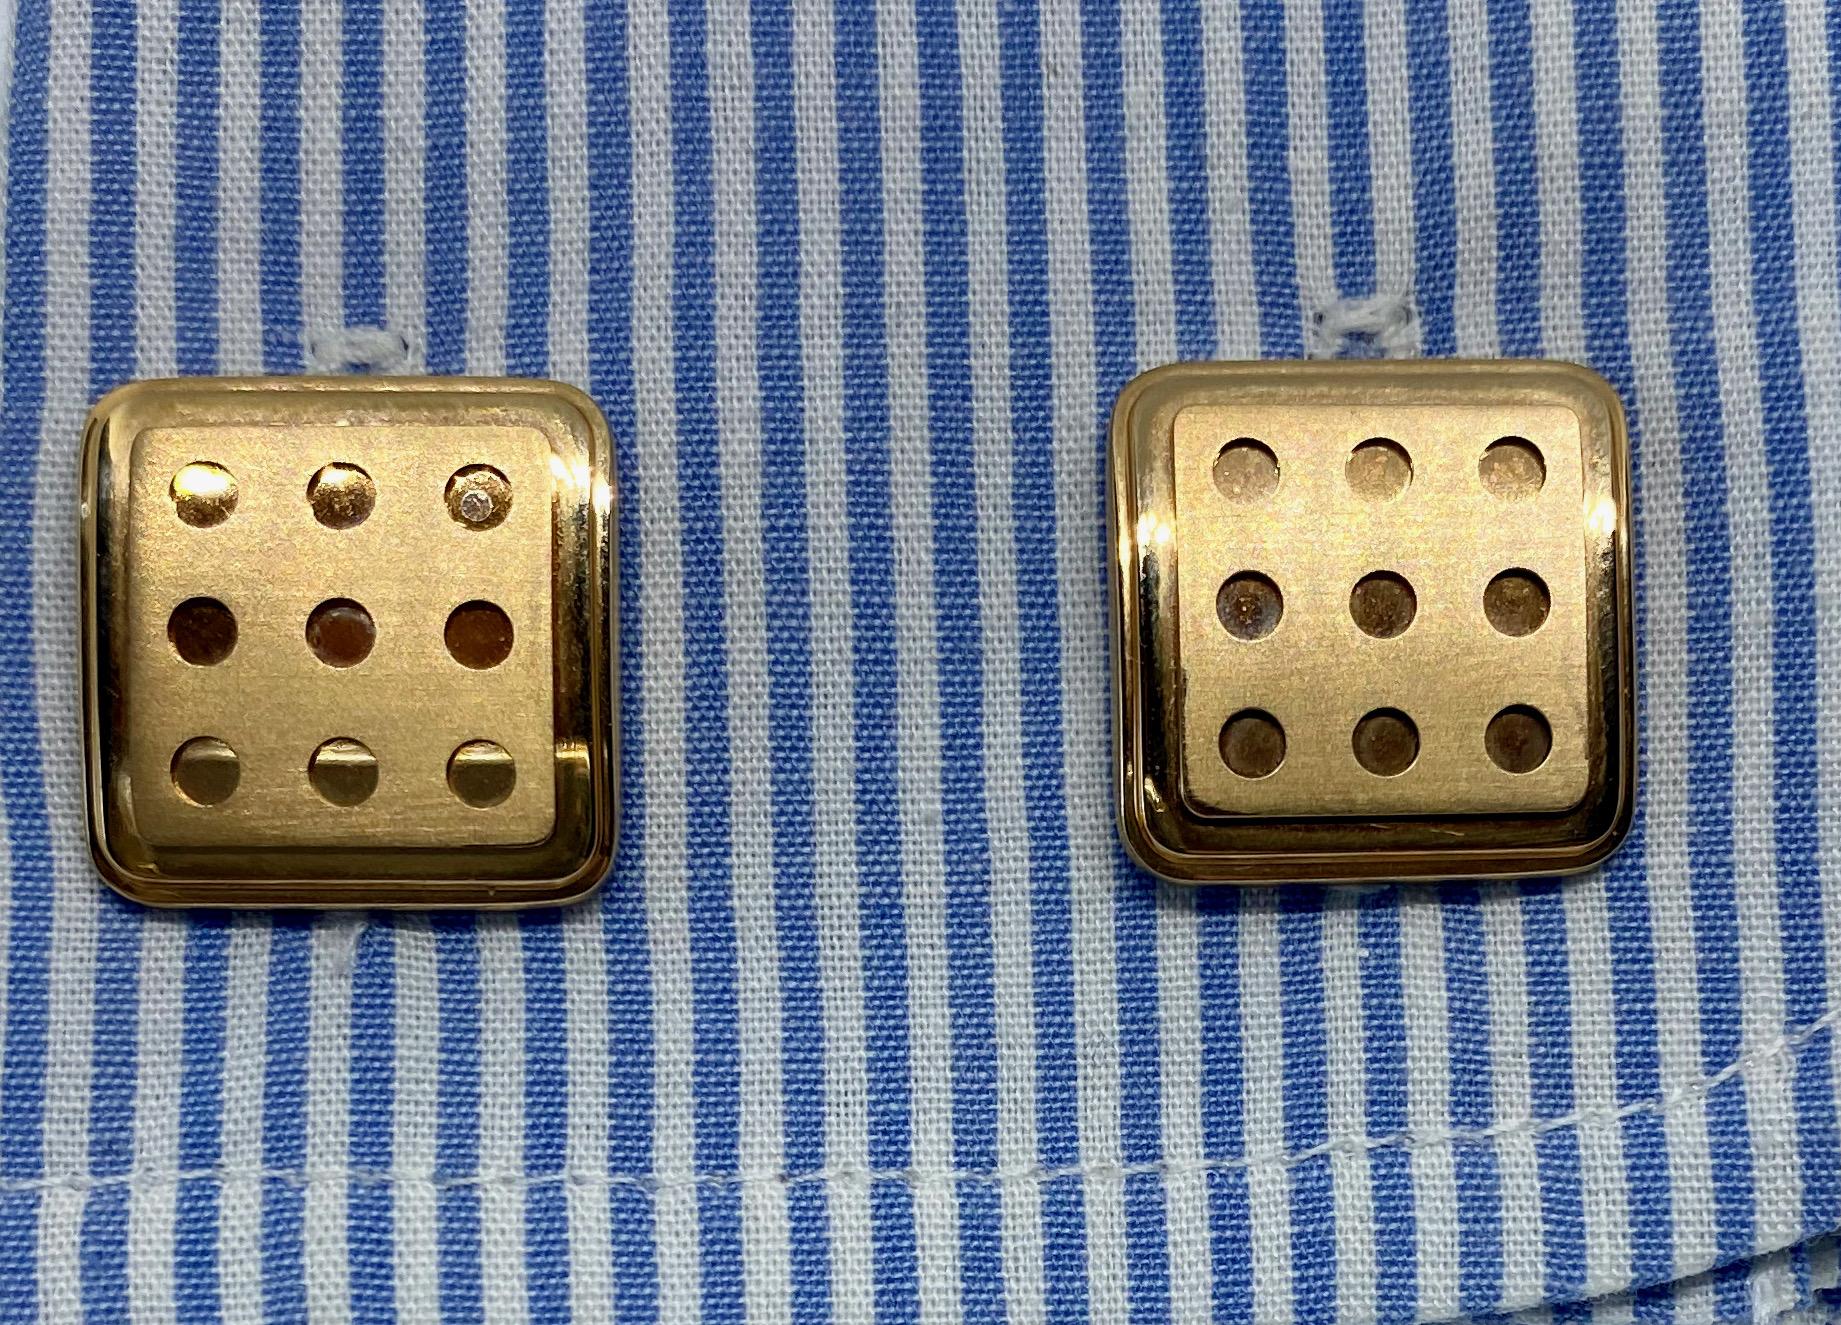 A striking and extremely rare pair of cufflinks in 18K rose gold made in Switzerland by Roger Dubuis. These cufflinks have square faces with brushed, perforated gold insets. The square toggle backs feature the RD logo.

Cufflink faces each measure